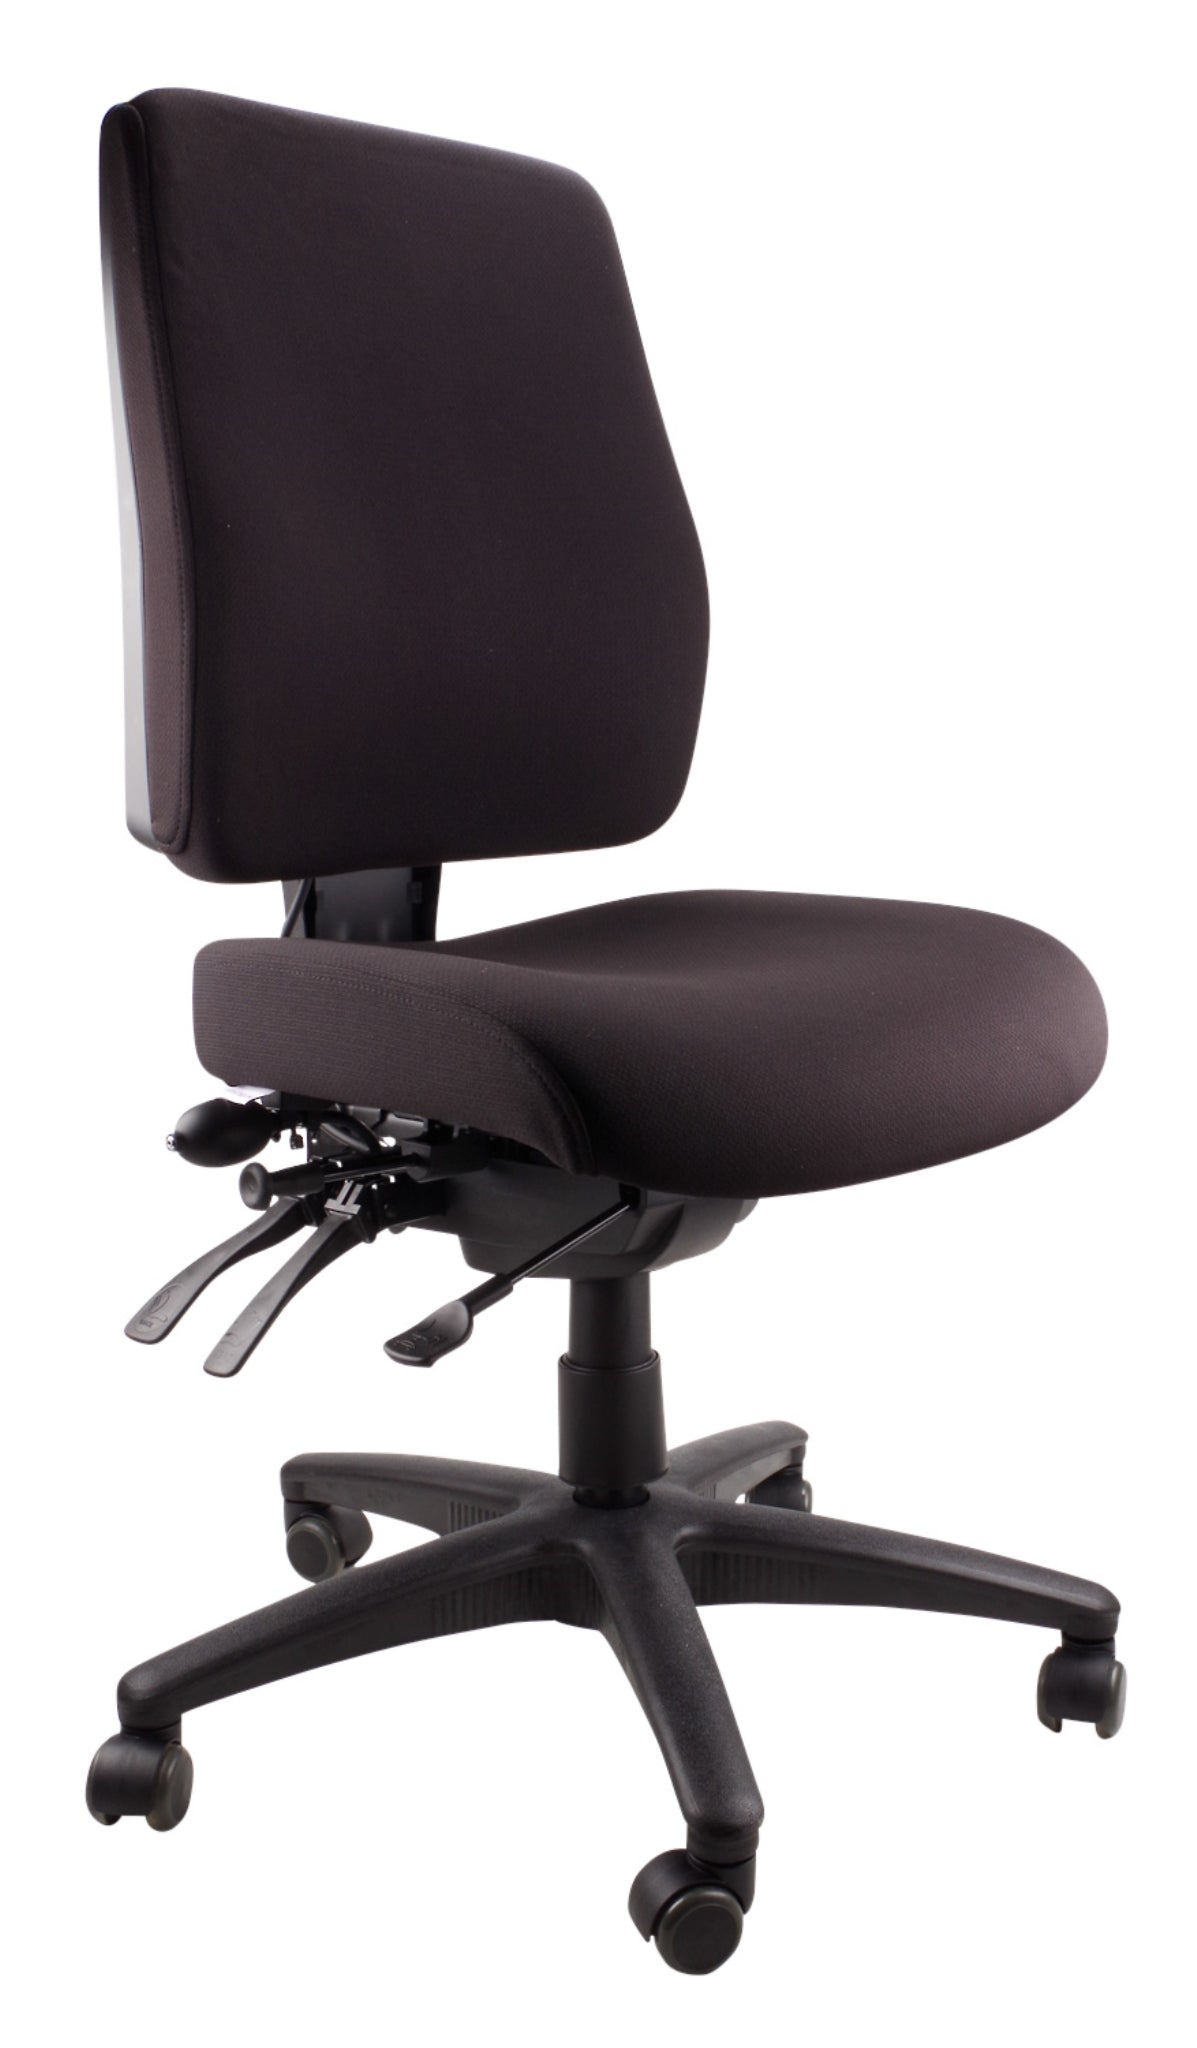 Buy Quality Ergo Air Ergonomic Office Desk Chair Now with FREE SHIPPING Black